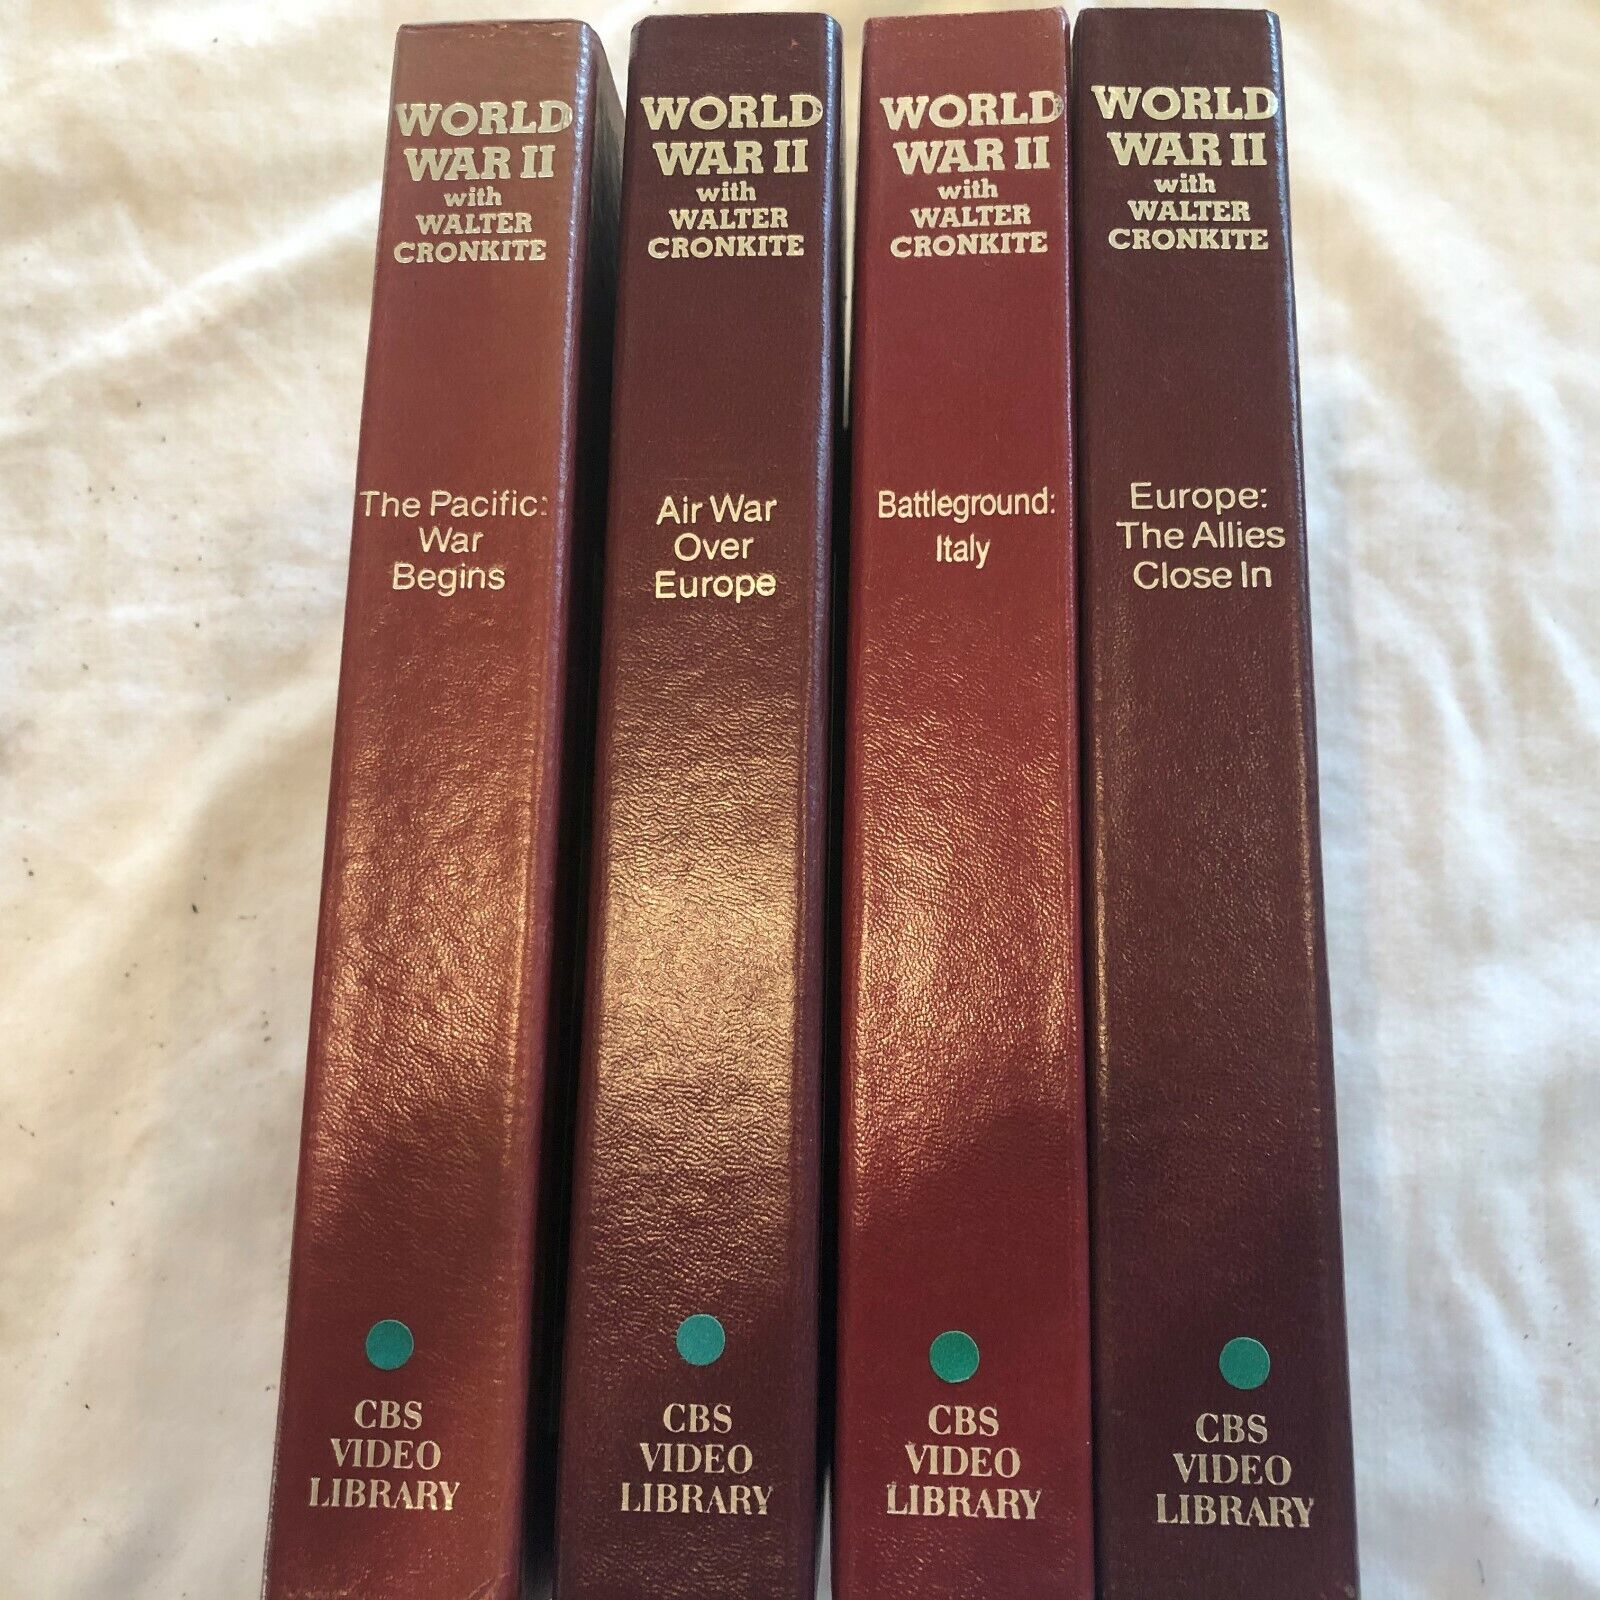 World War II with Walter Cronkite. CBS Video Library. LOT OF 4 VHS tapes. 